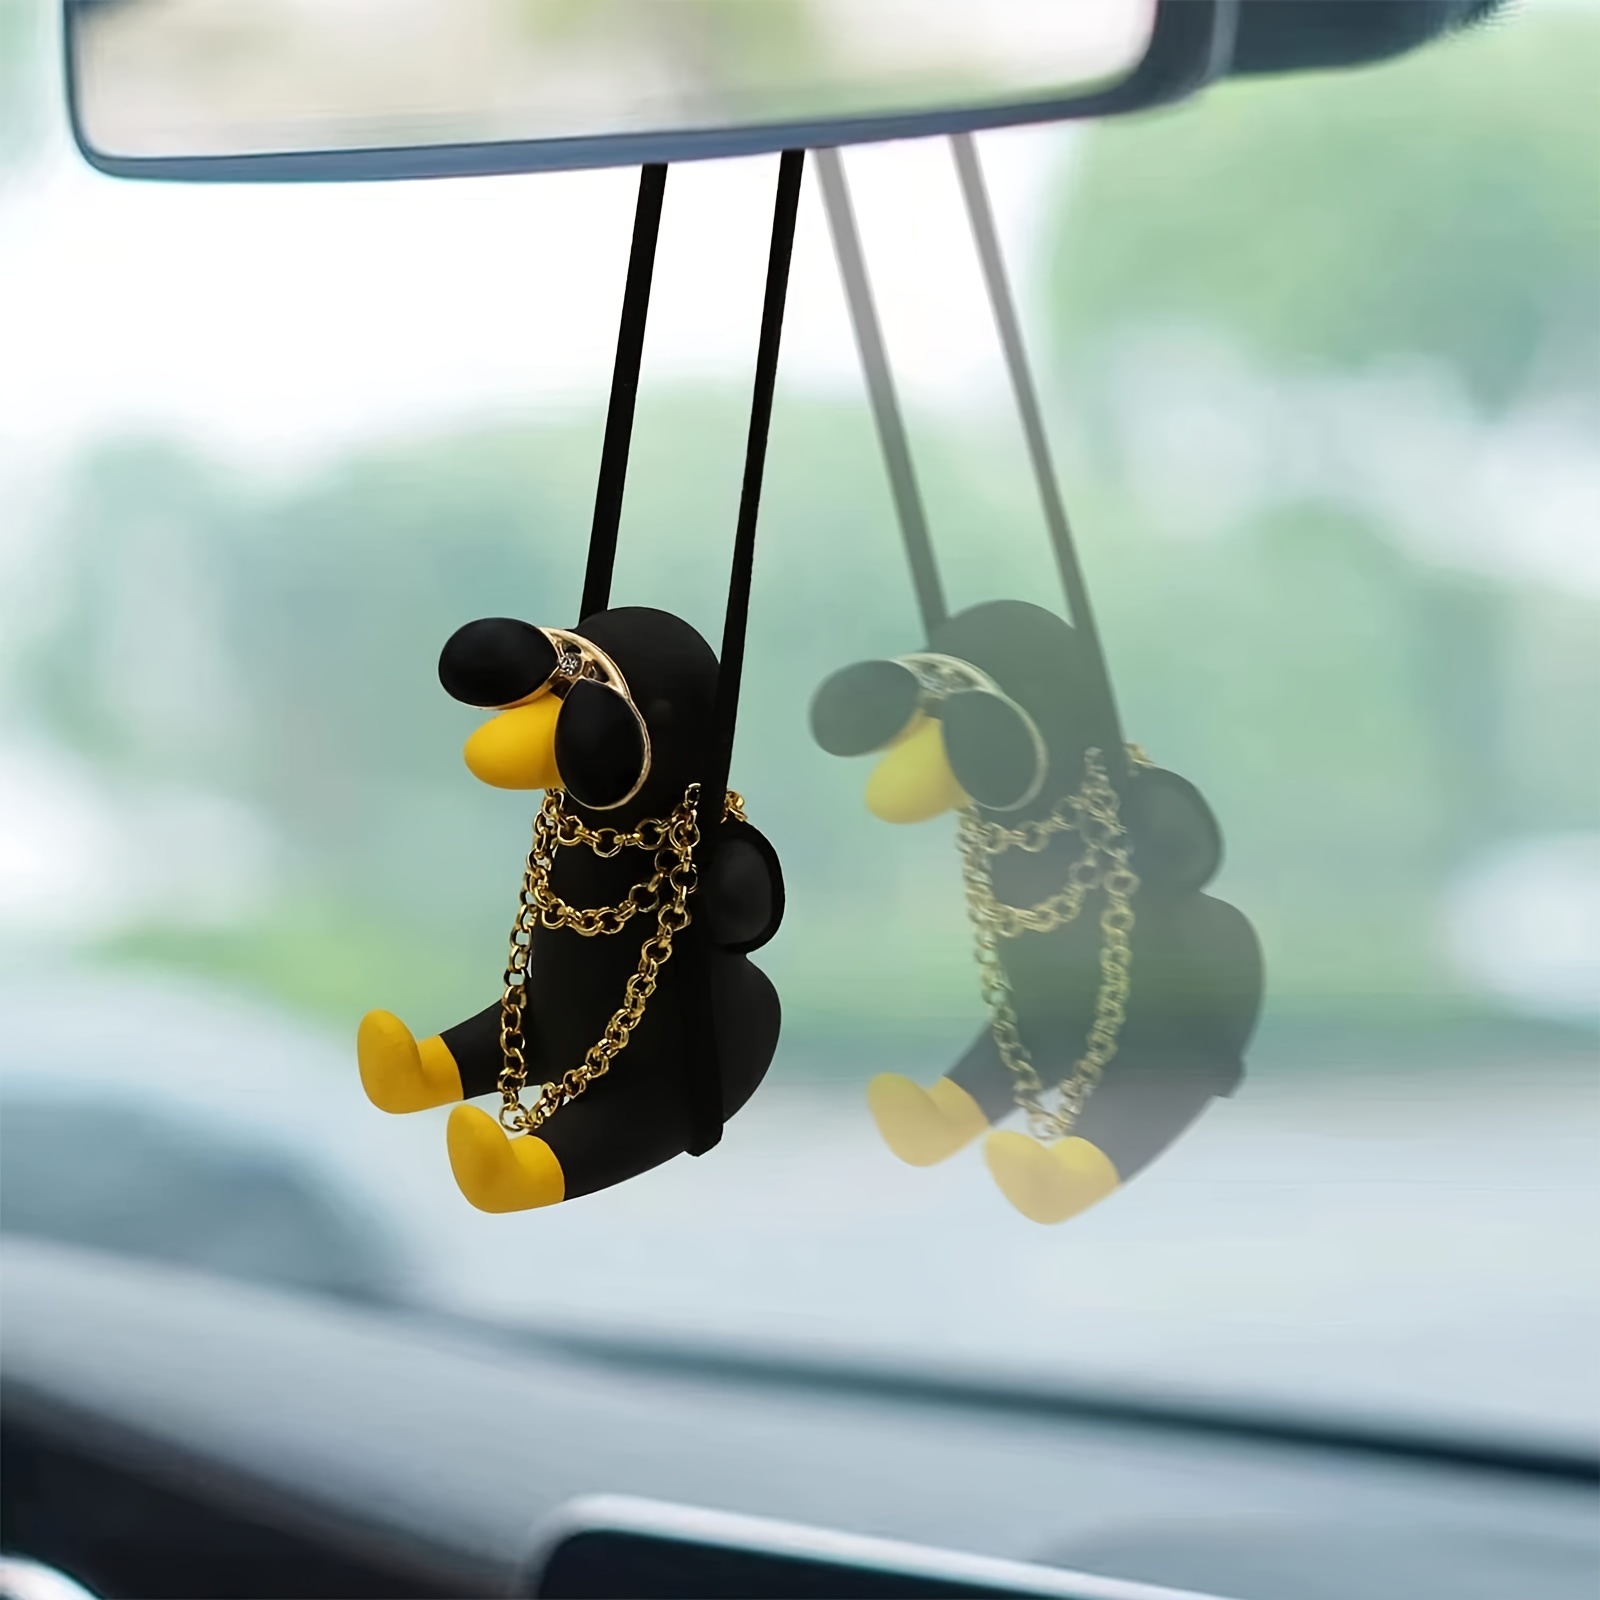 Swinging Duck Car Hanging Ornament, Cute Car Hanging Accessories For Rear  View Mirror, Car Pendant Sunglasses Duck Hanging Swing